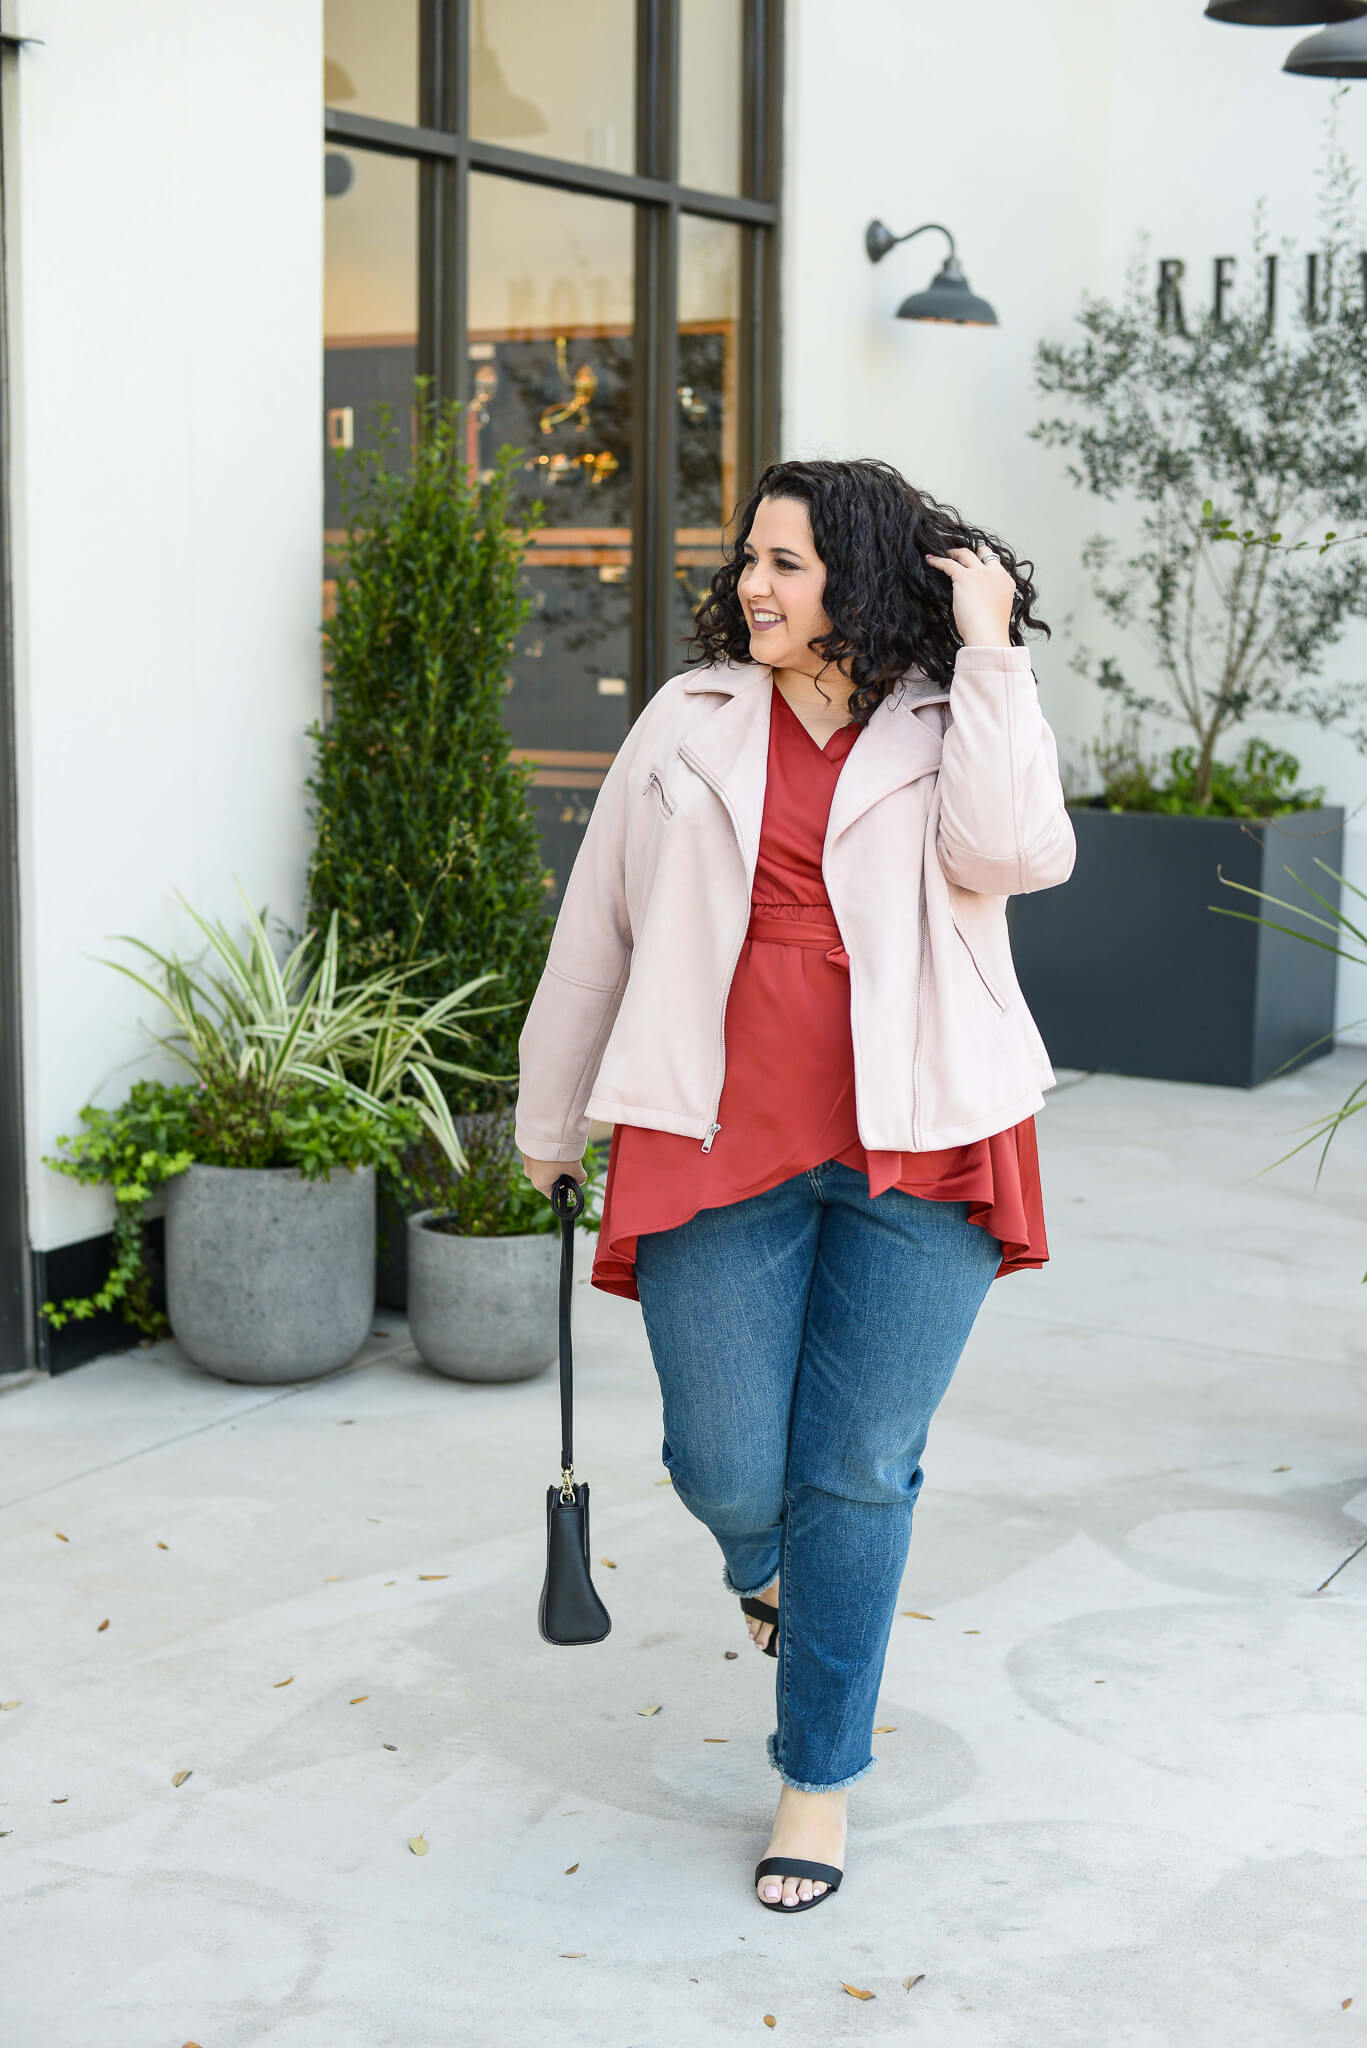 Walking into the weekend feeling super confident in this Lane Bryant blouse 